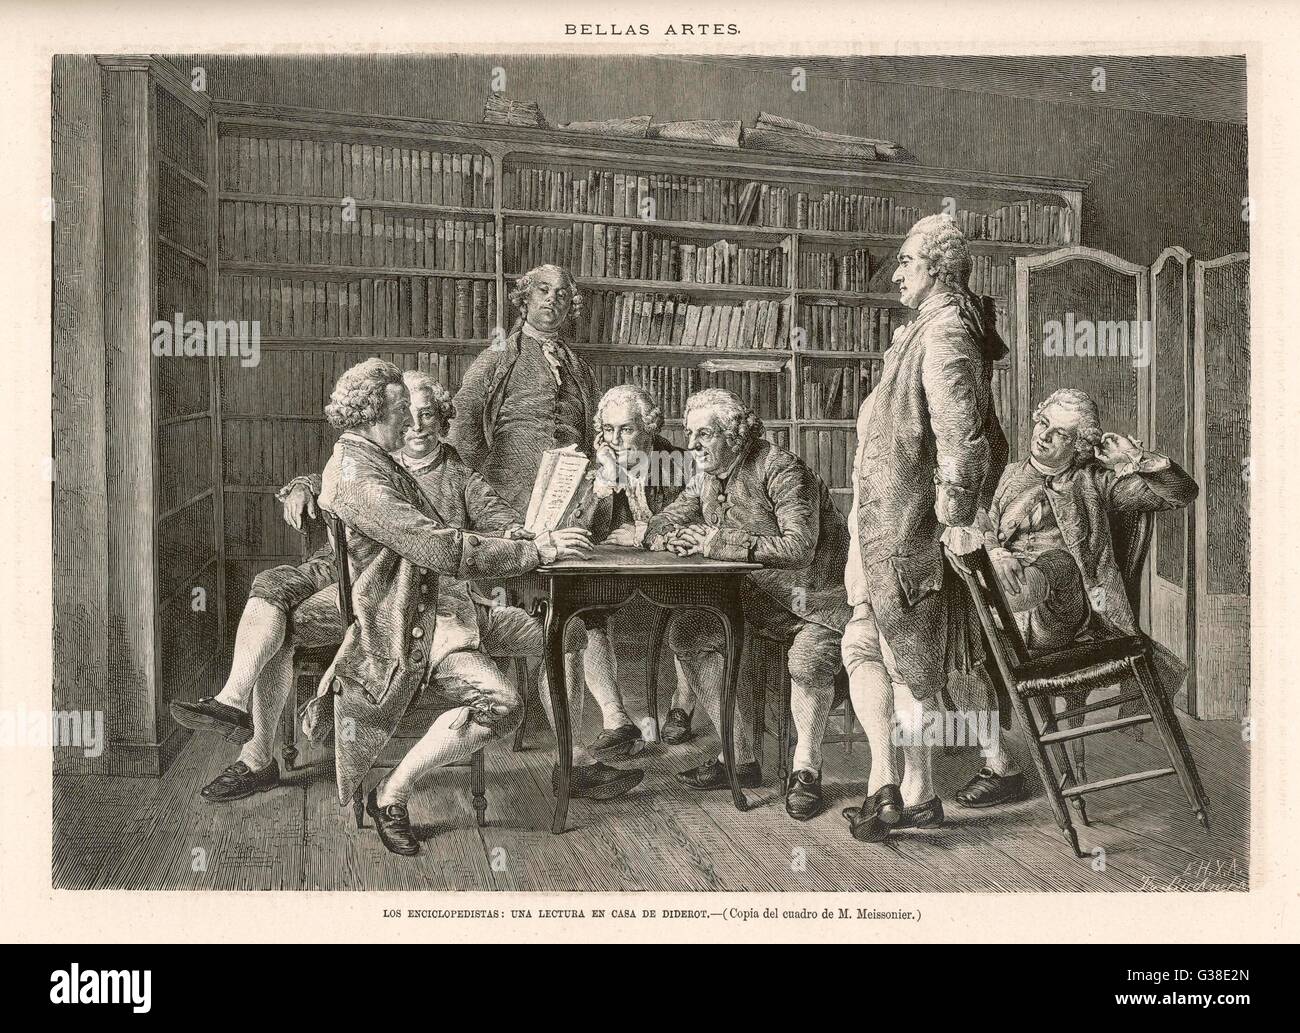 DENIS DIDEROT French encyclopedist and  philosopher who worked as a  teacher and a translator. Discussing the encyclopedia  with colleagues.     Date: 1713 - 1784 Stock Photo